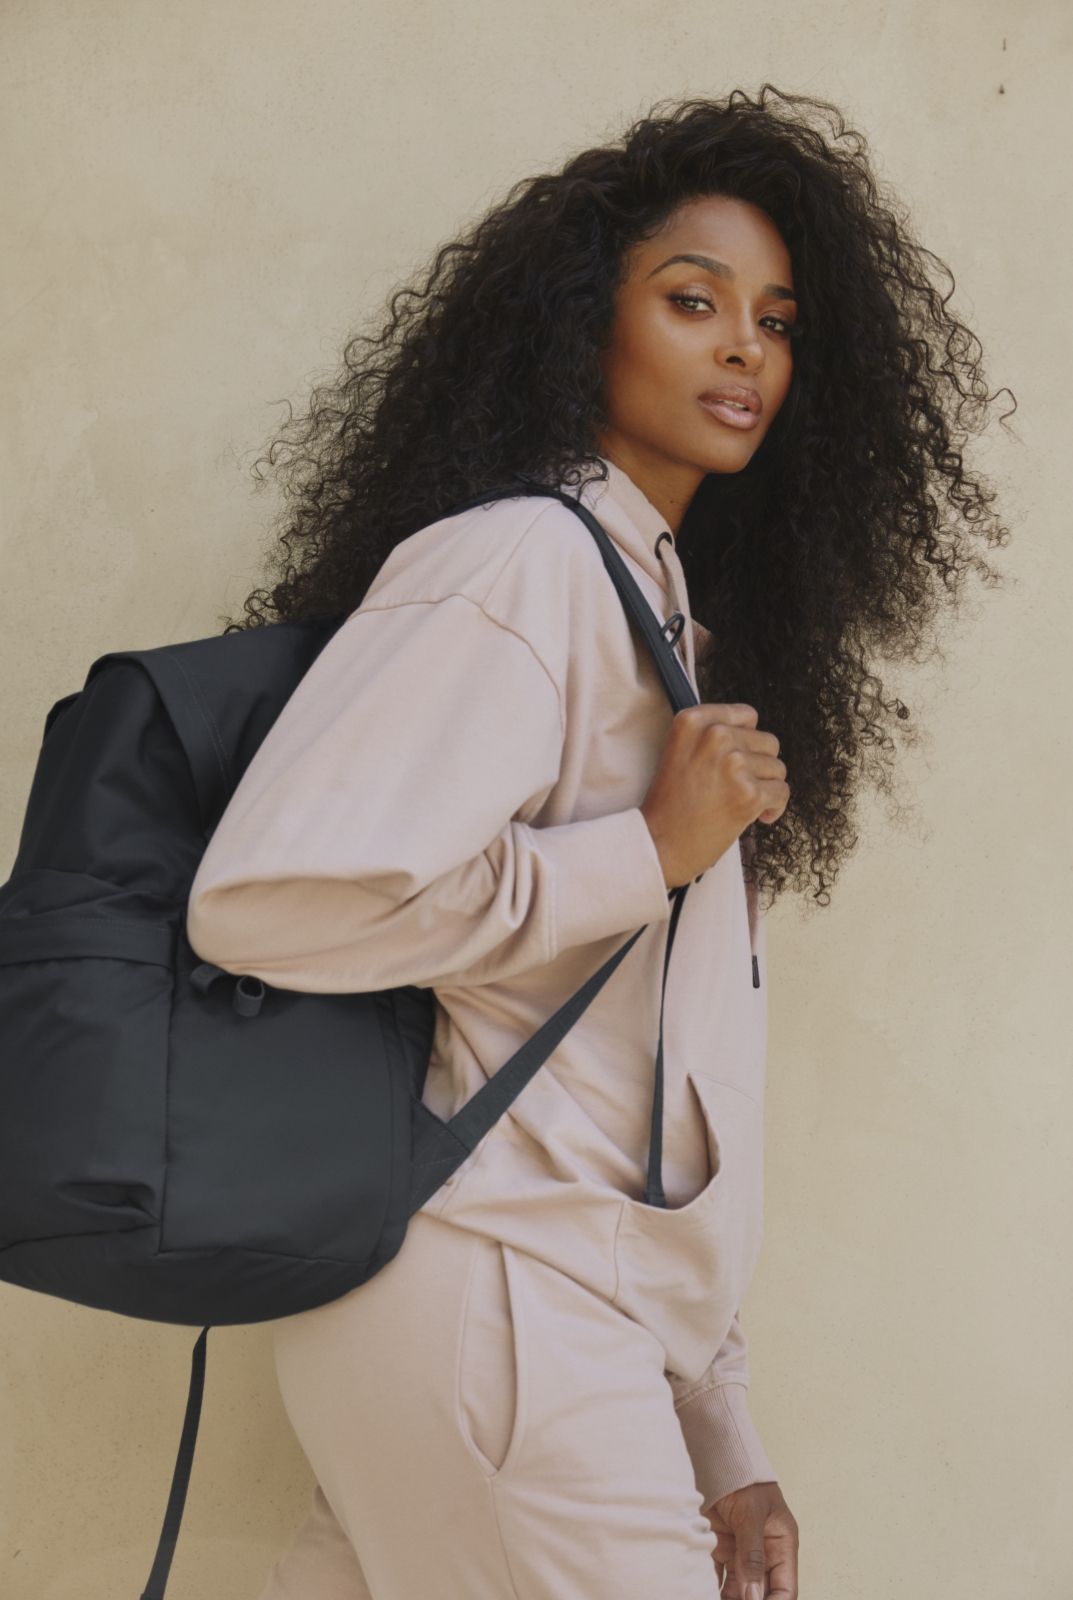 Ciara's Accessories Line is a Chic Backpack